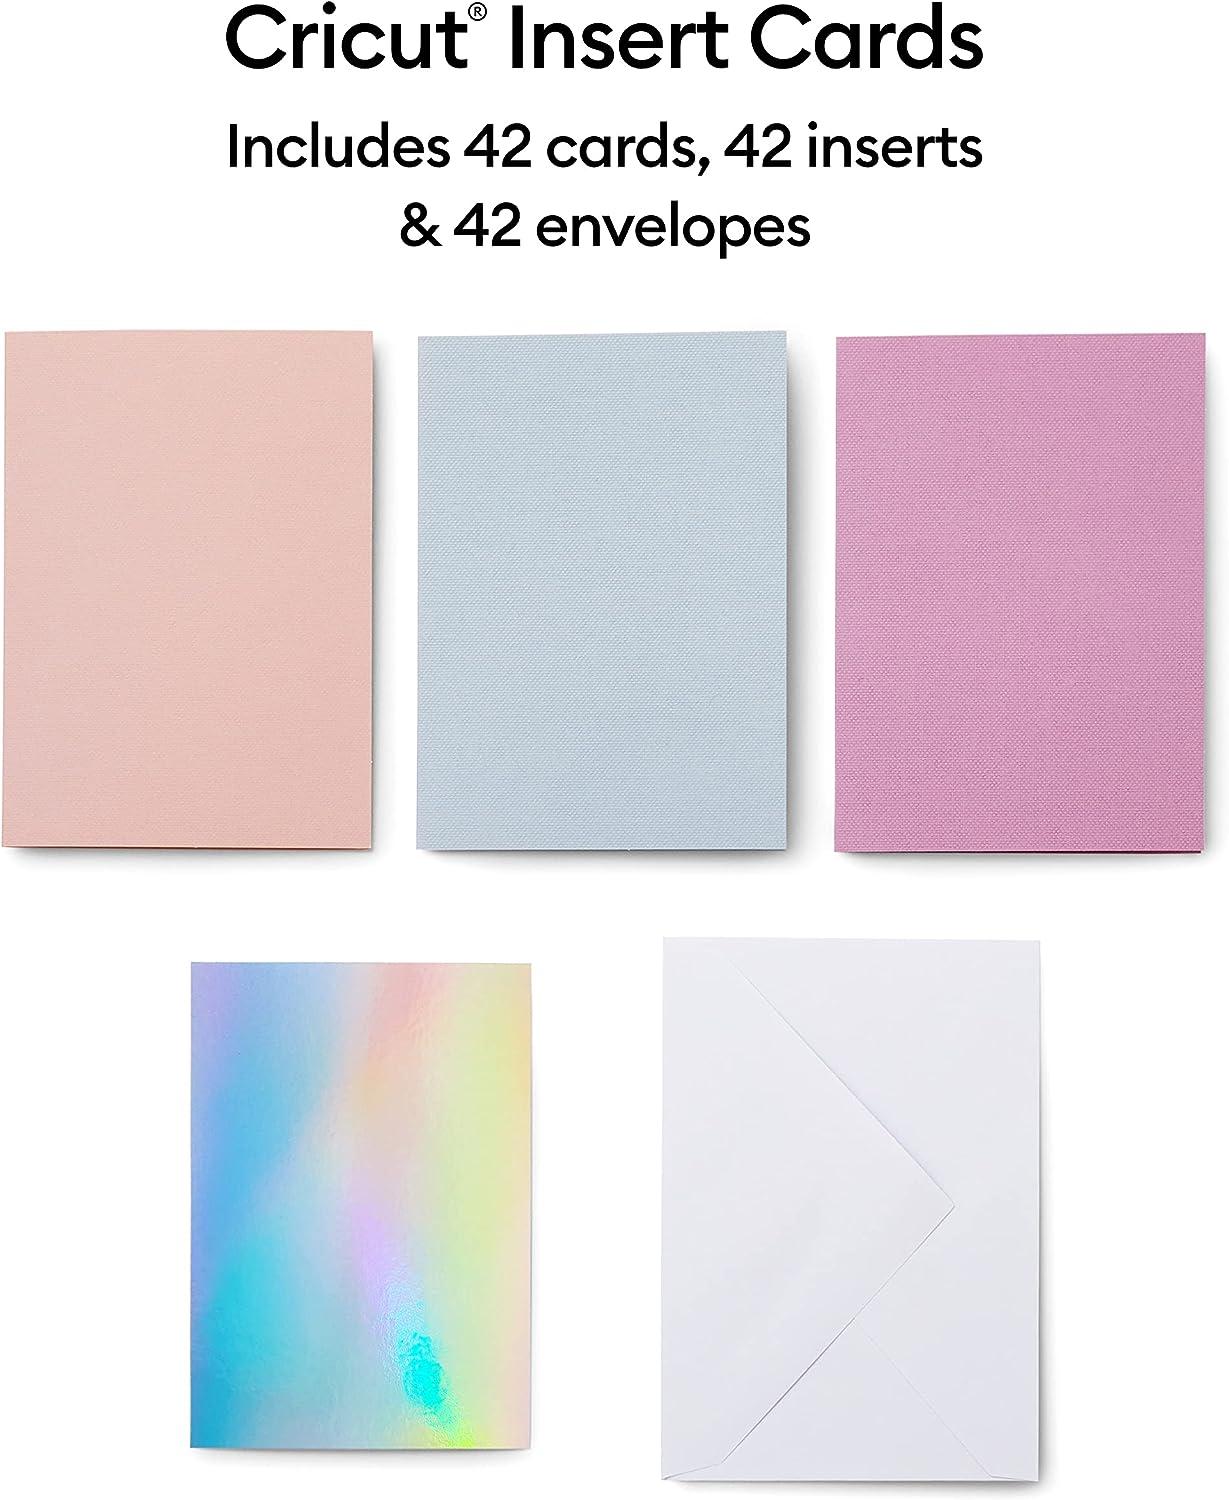 Cricut Insert Cards R10, Create Depth-Filled Birthday Cards, Thank You Cards,  Custom Greeting Cards at Home, Compatible with Cricut Joy/Maker/Explore  Machines, Princess Sampler (42 ct) Princess 42 Count